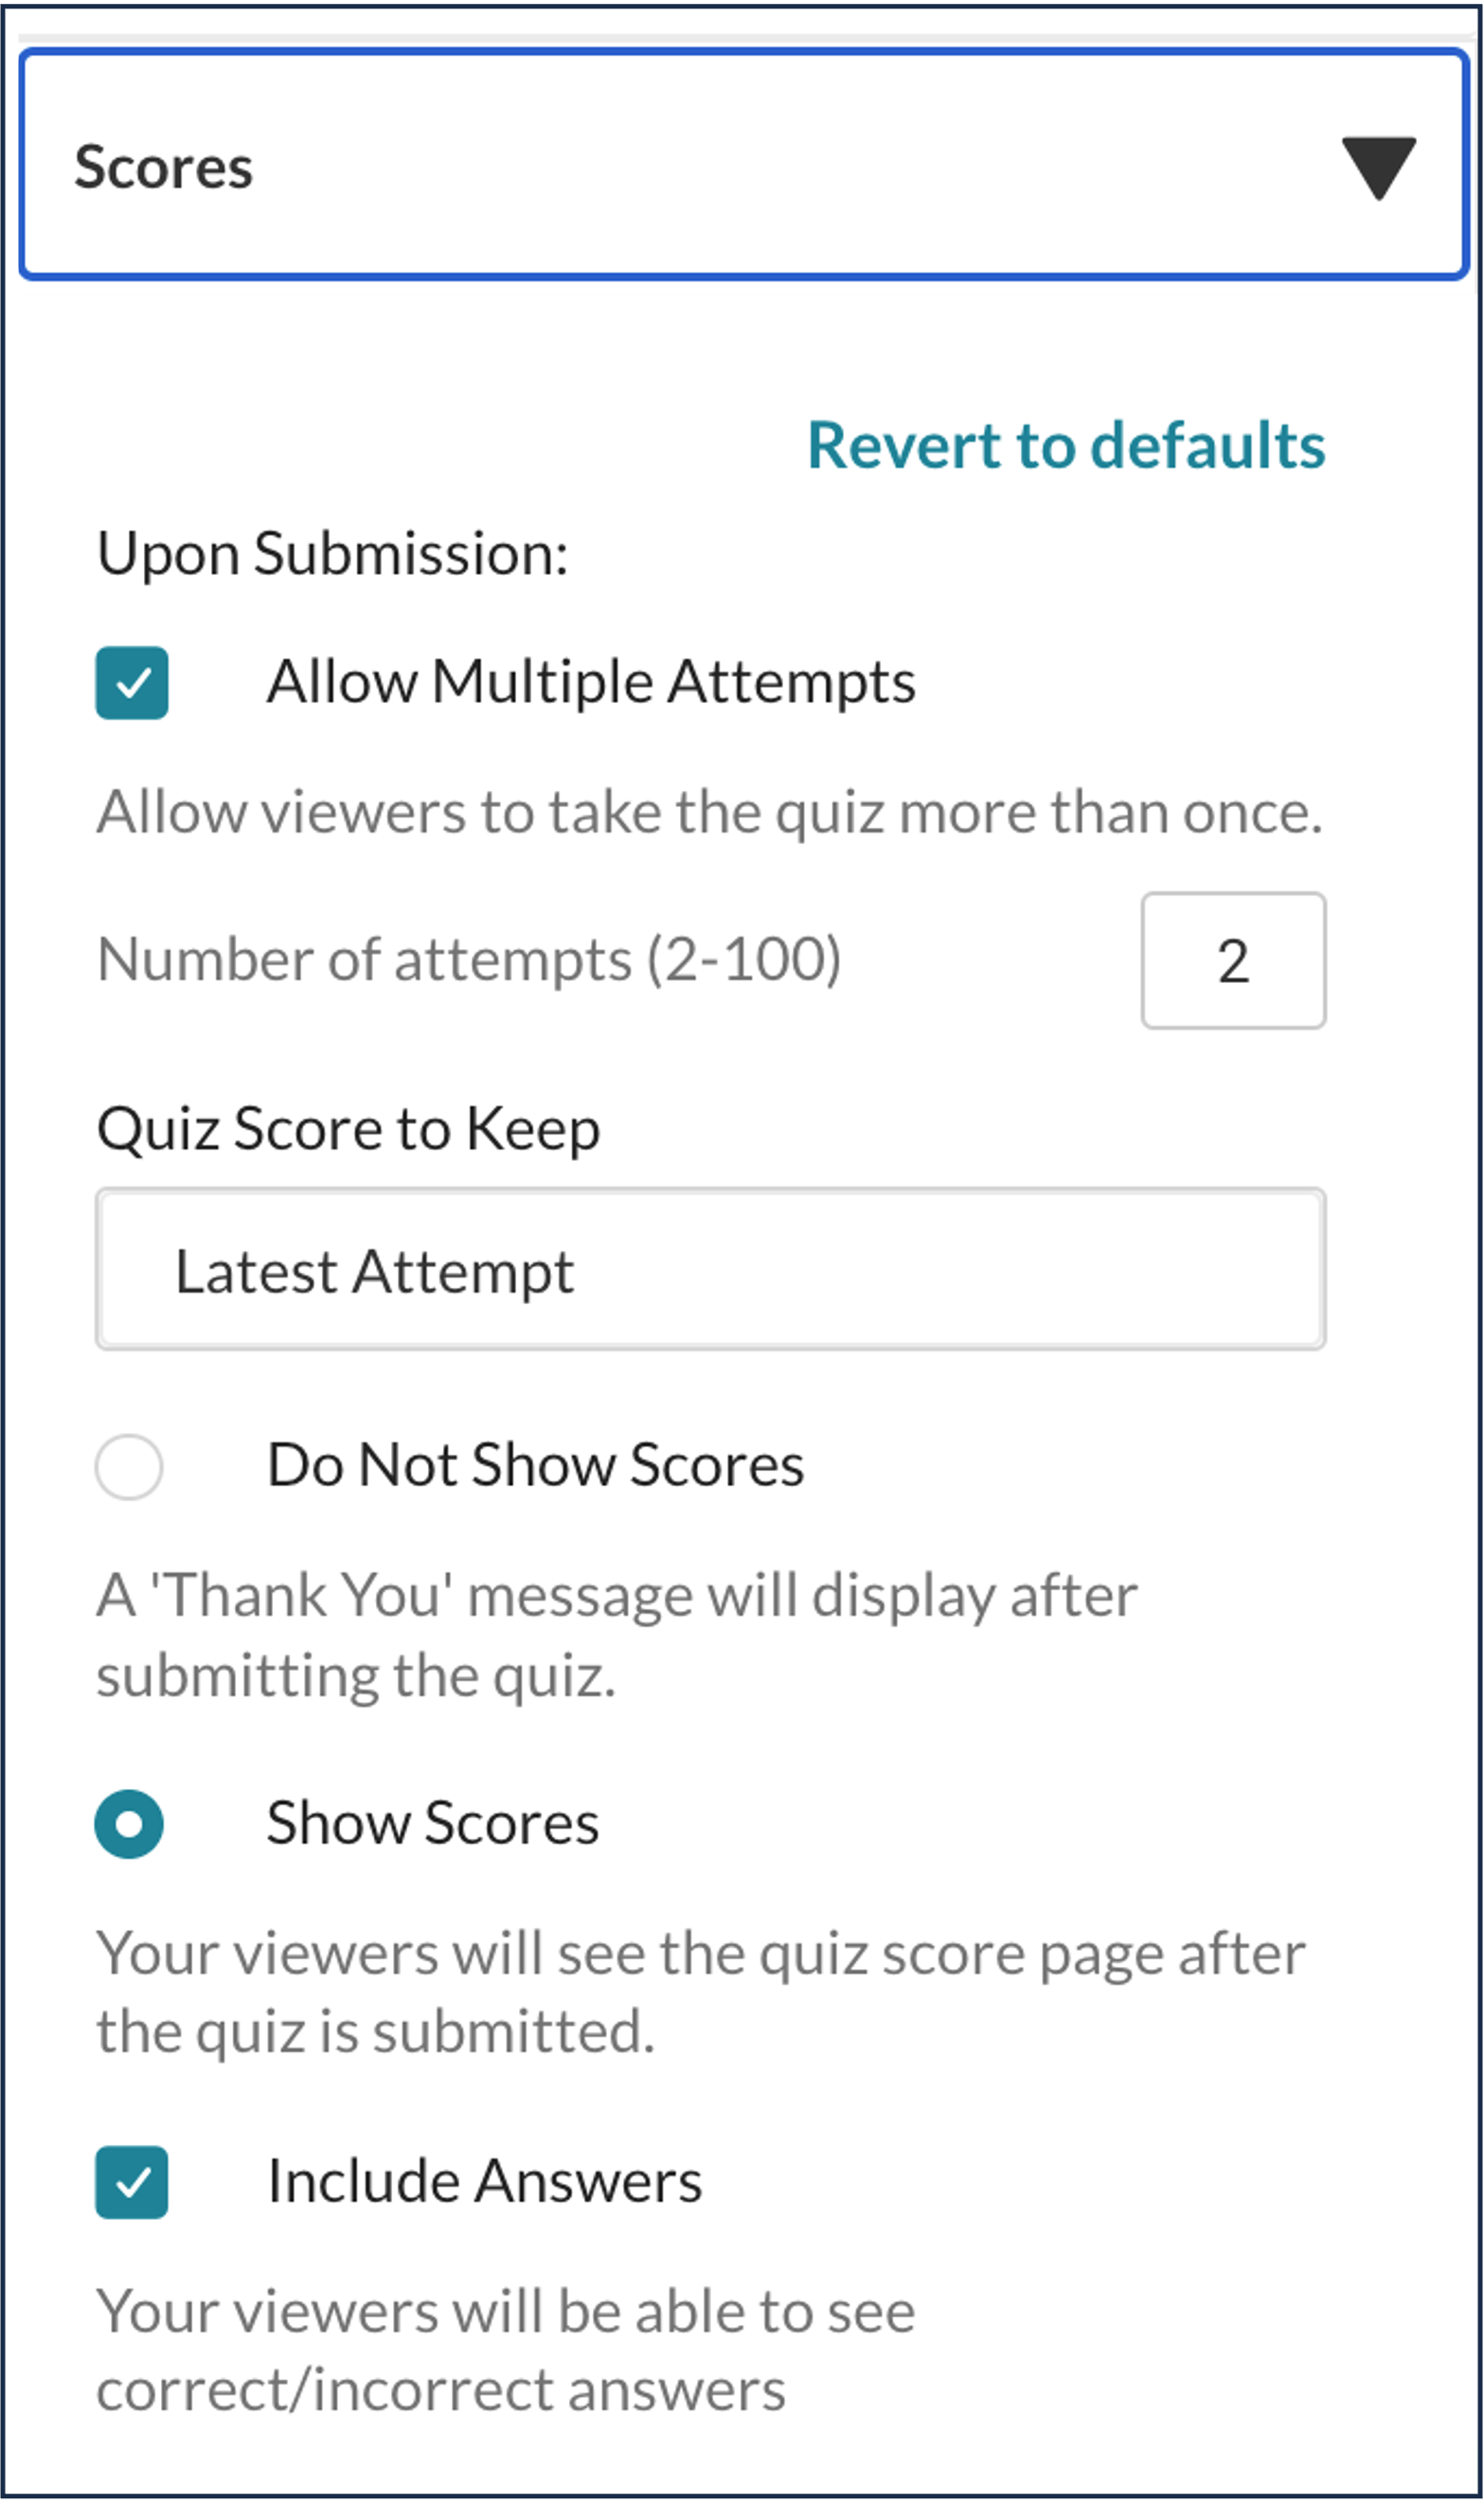 A screenshot of the "scores" section of IVQ configuration.